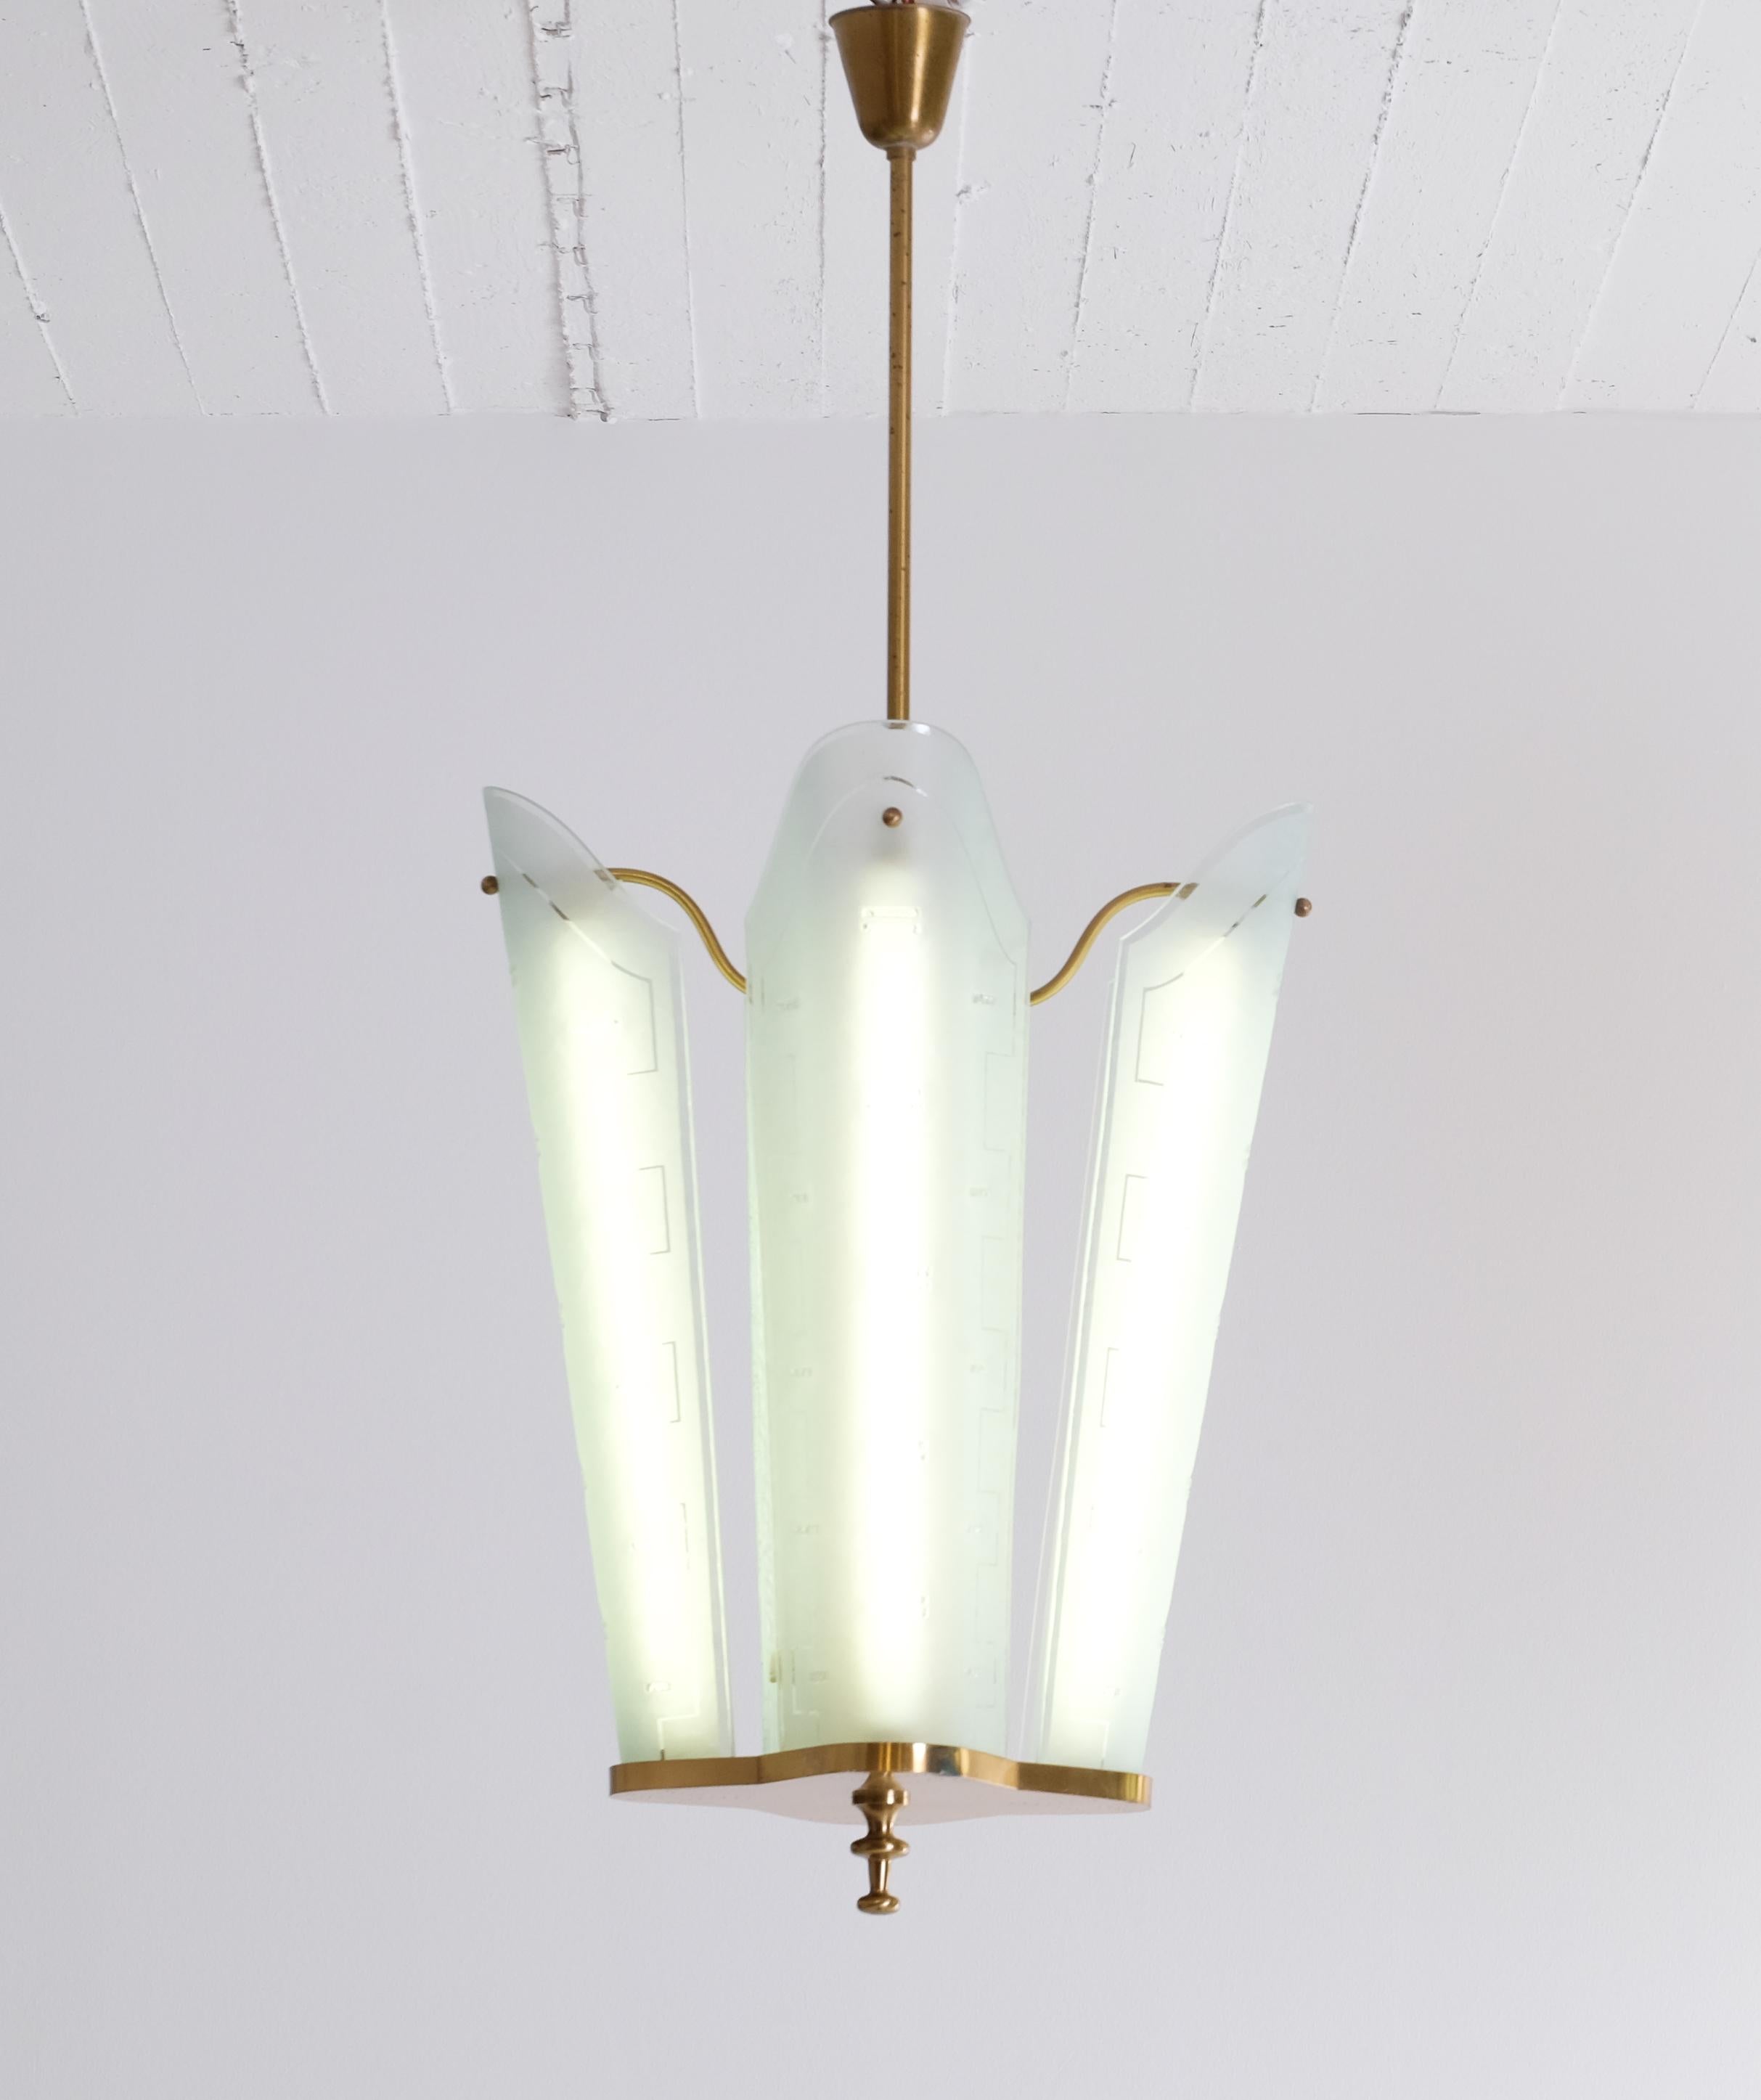 Bo Notini Ceiling Lamps by Glössner, Sweden, 1950s In Good Condition For Sale In Stockholm, SE